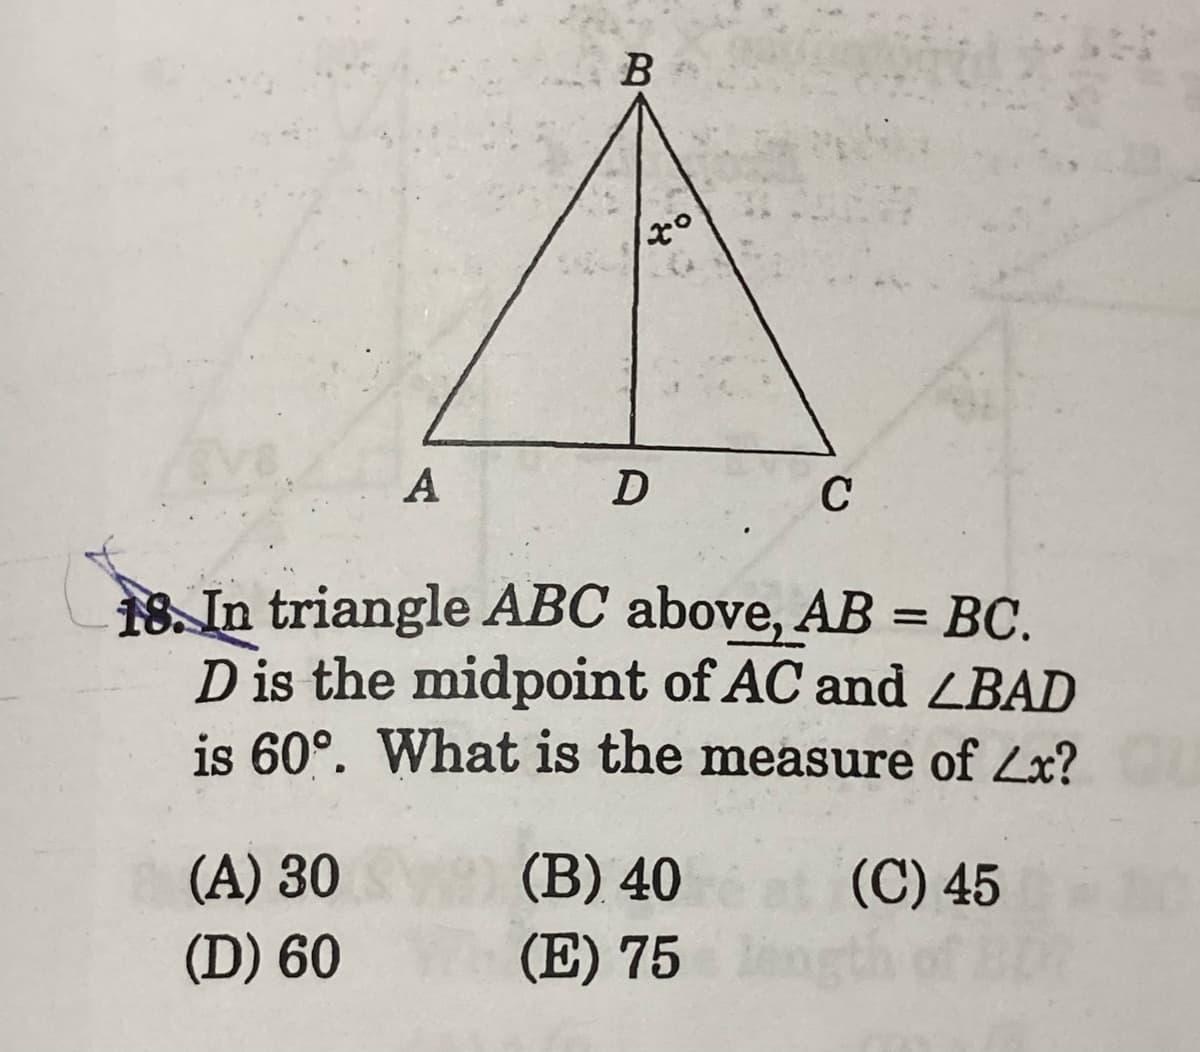 A
D
C
18. In triangle ABC above, AB = BC.
D is the midpoint of AC and ZBAD
is 60°. What is the measure of Zx?
(A) 30
(В) 40
(C) 45
(D) 60
(E) 75
B.
